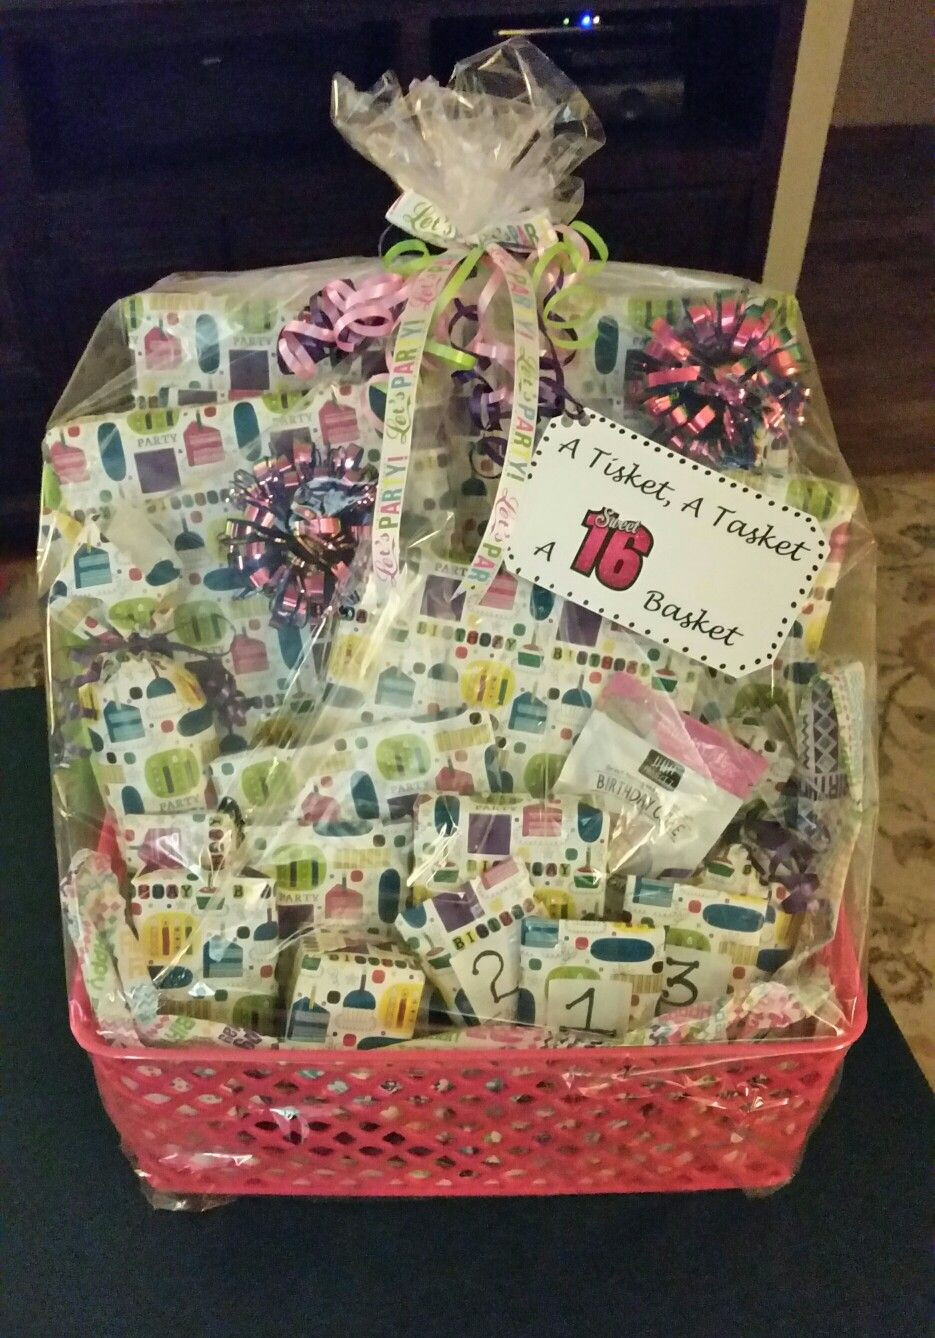 Sweet 16 Gift Ideas Girls
 A Tisket A Tasket A Sweet 16 Basket Filled with 16 ts for the Special Birthday Girl